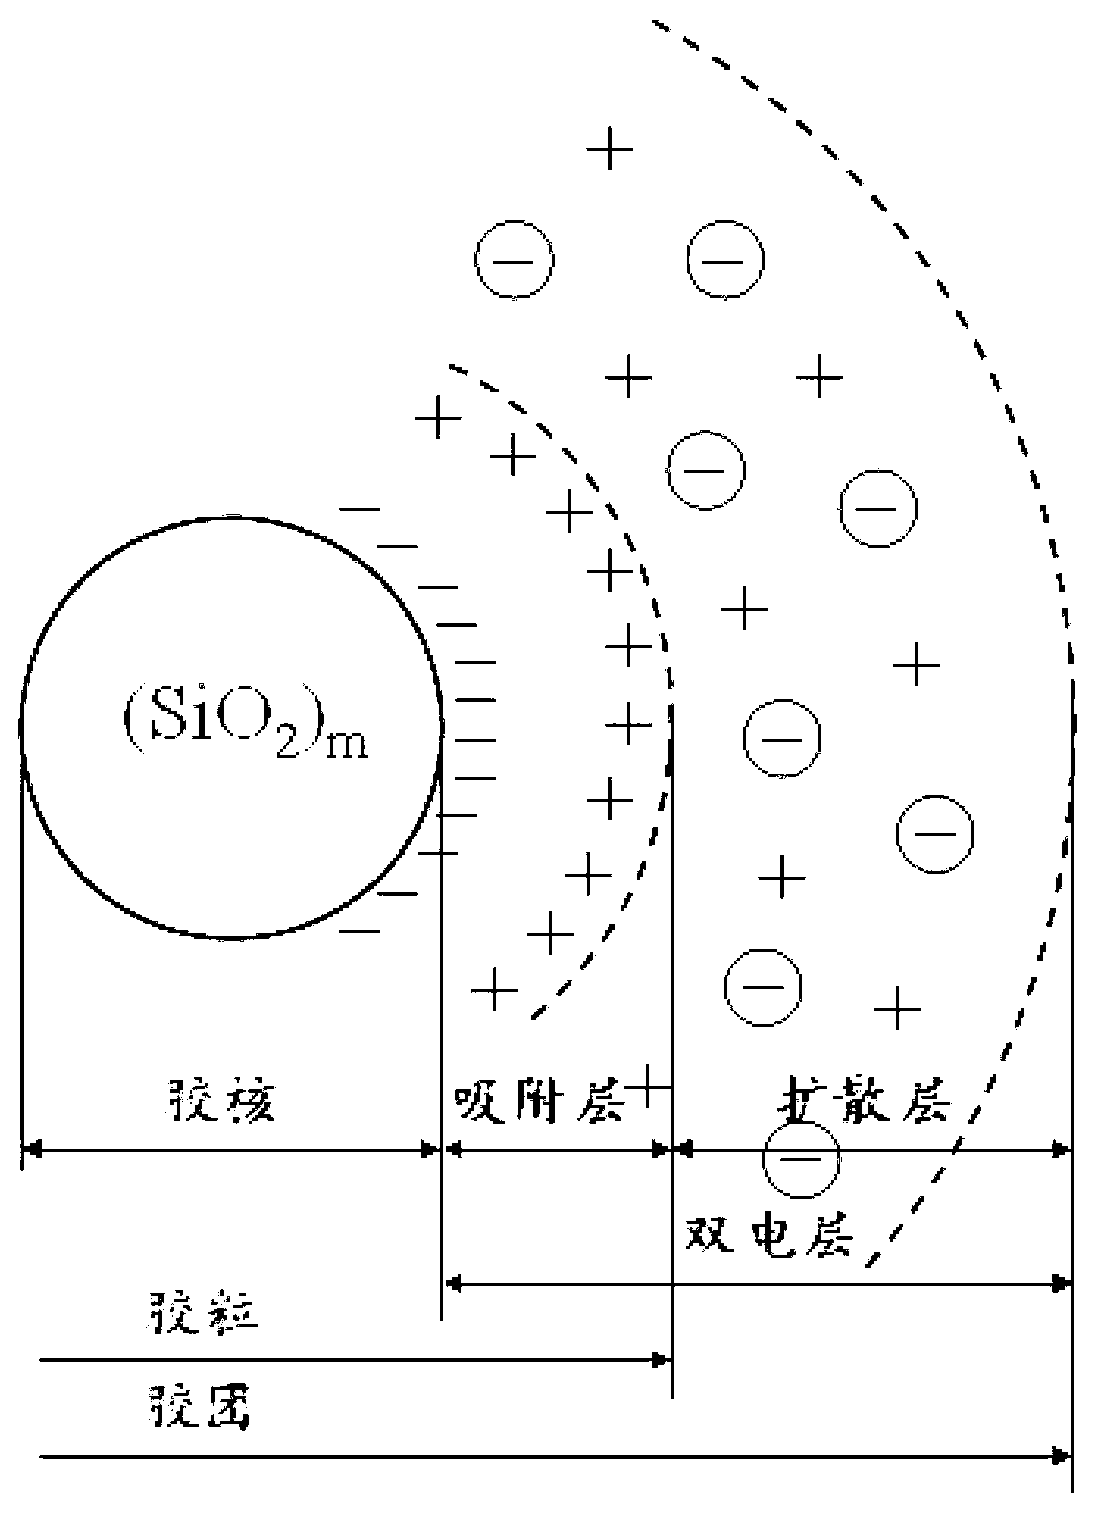 Low-temperature foam glass thermal insulation material and preparation method thereof